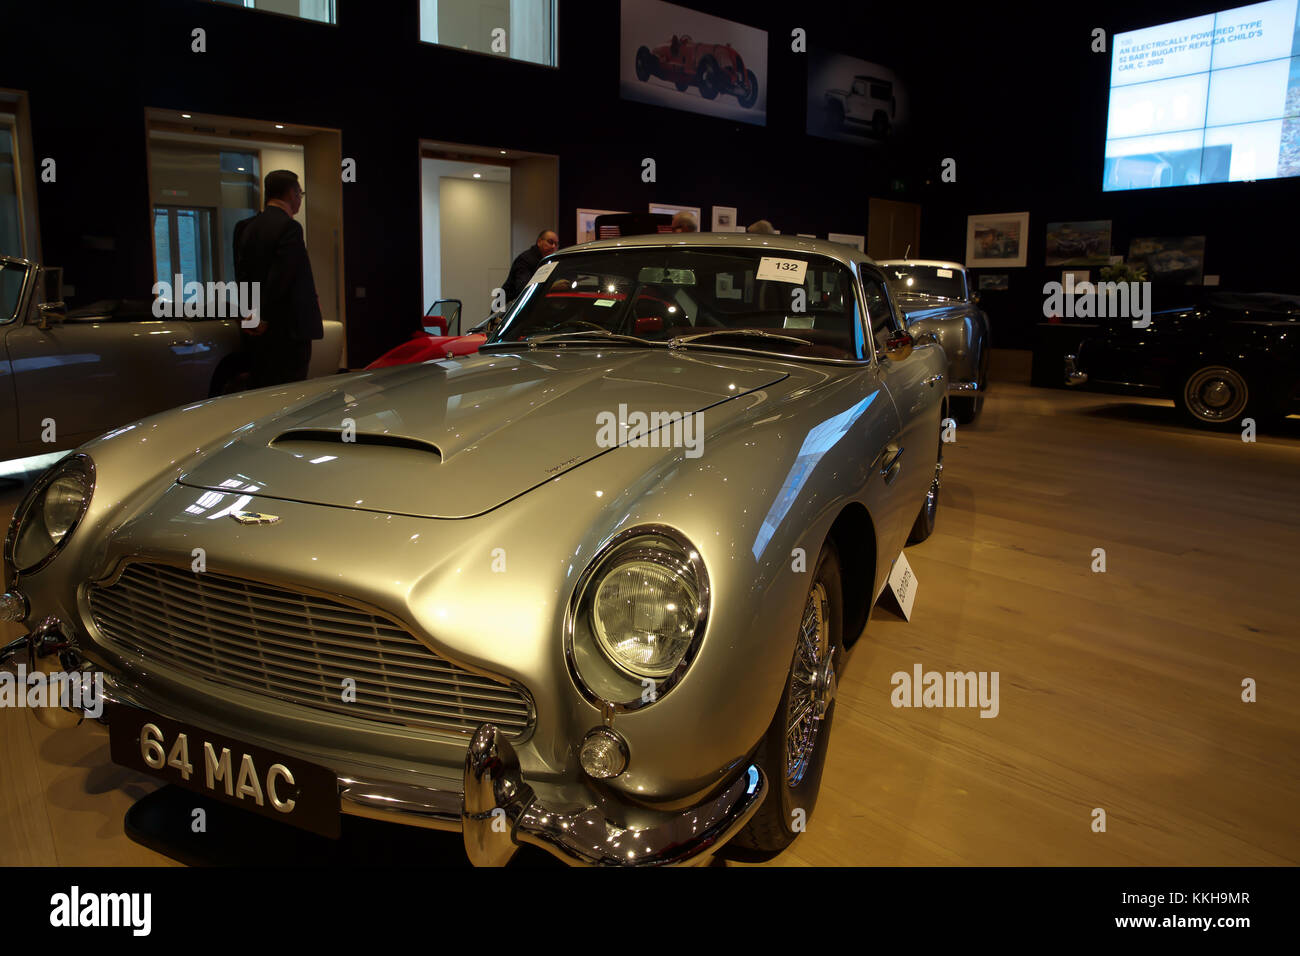 London, UK,1st December 2017, Top Celebrity cars on display at Bonhams in London. Cars include: The ex-Sir Paul McCartney 1964 Aston Martin DB5 Sports Saloon (£1,250,000 - £1,500,000)  Credit: Keith Larby/Alamy Live News Stock Photo